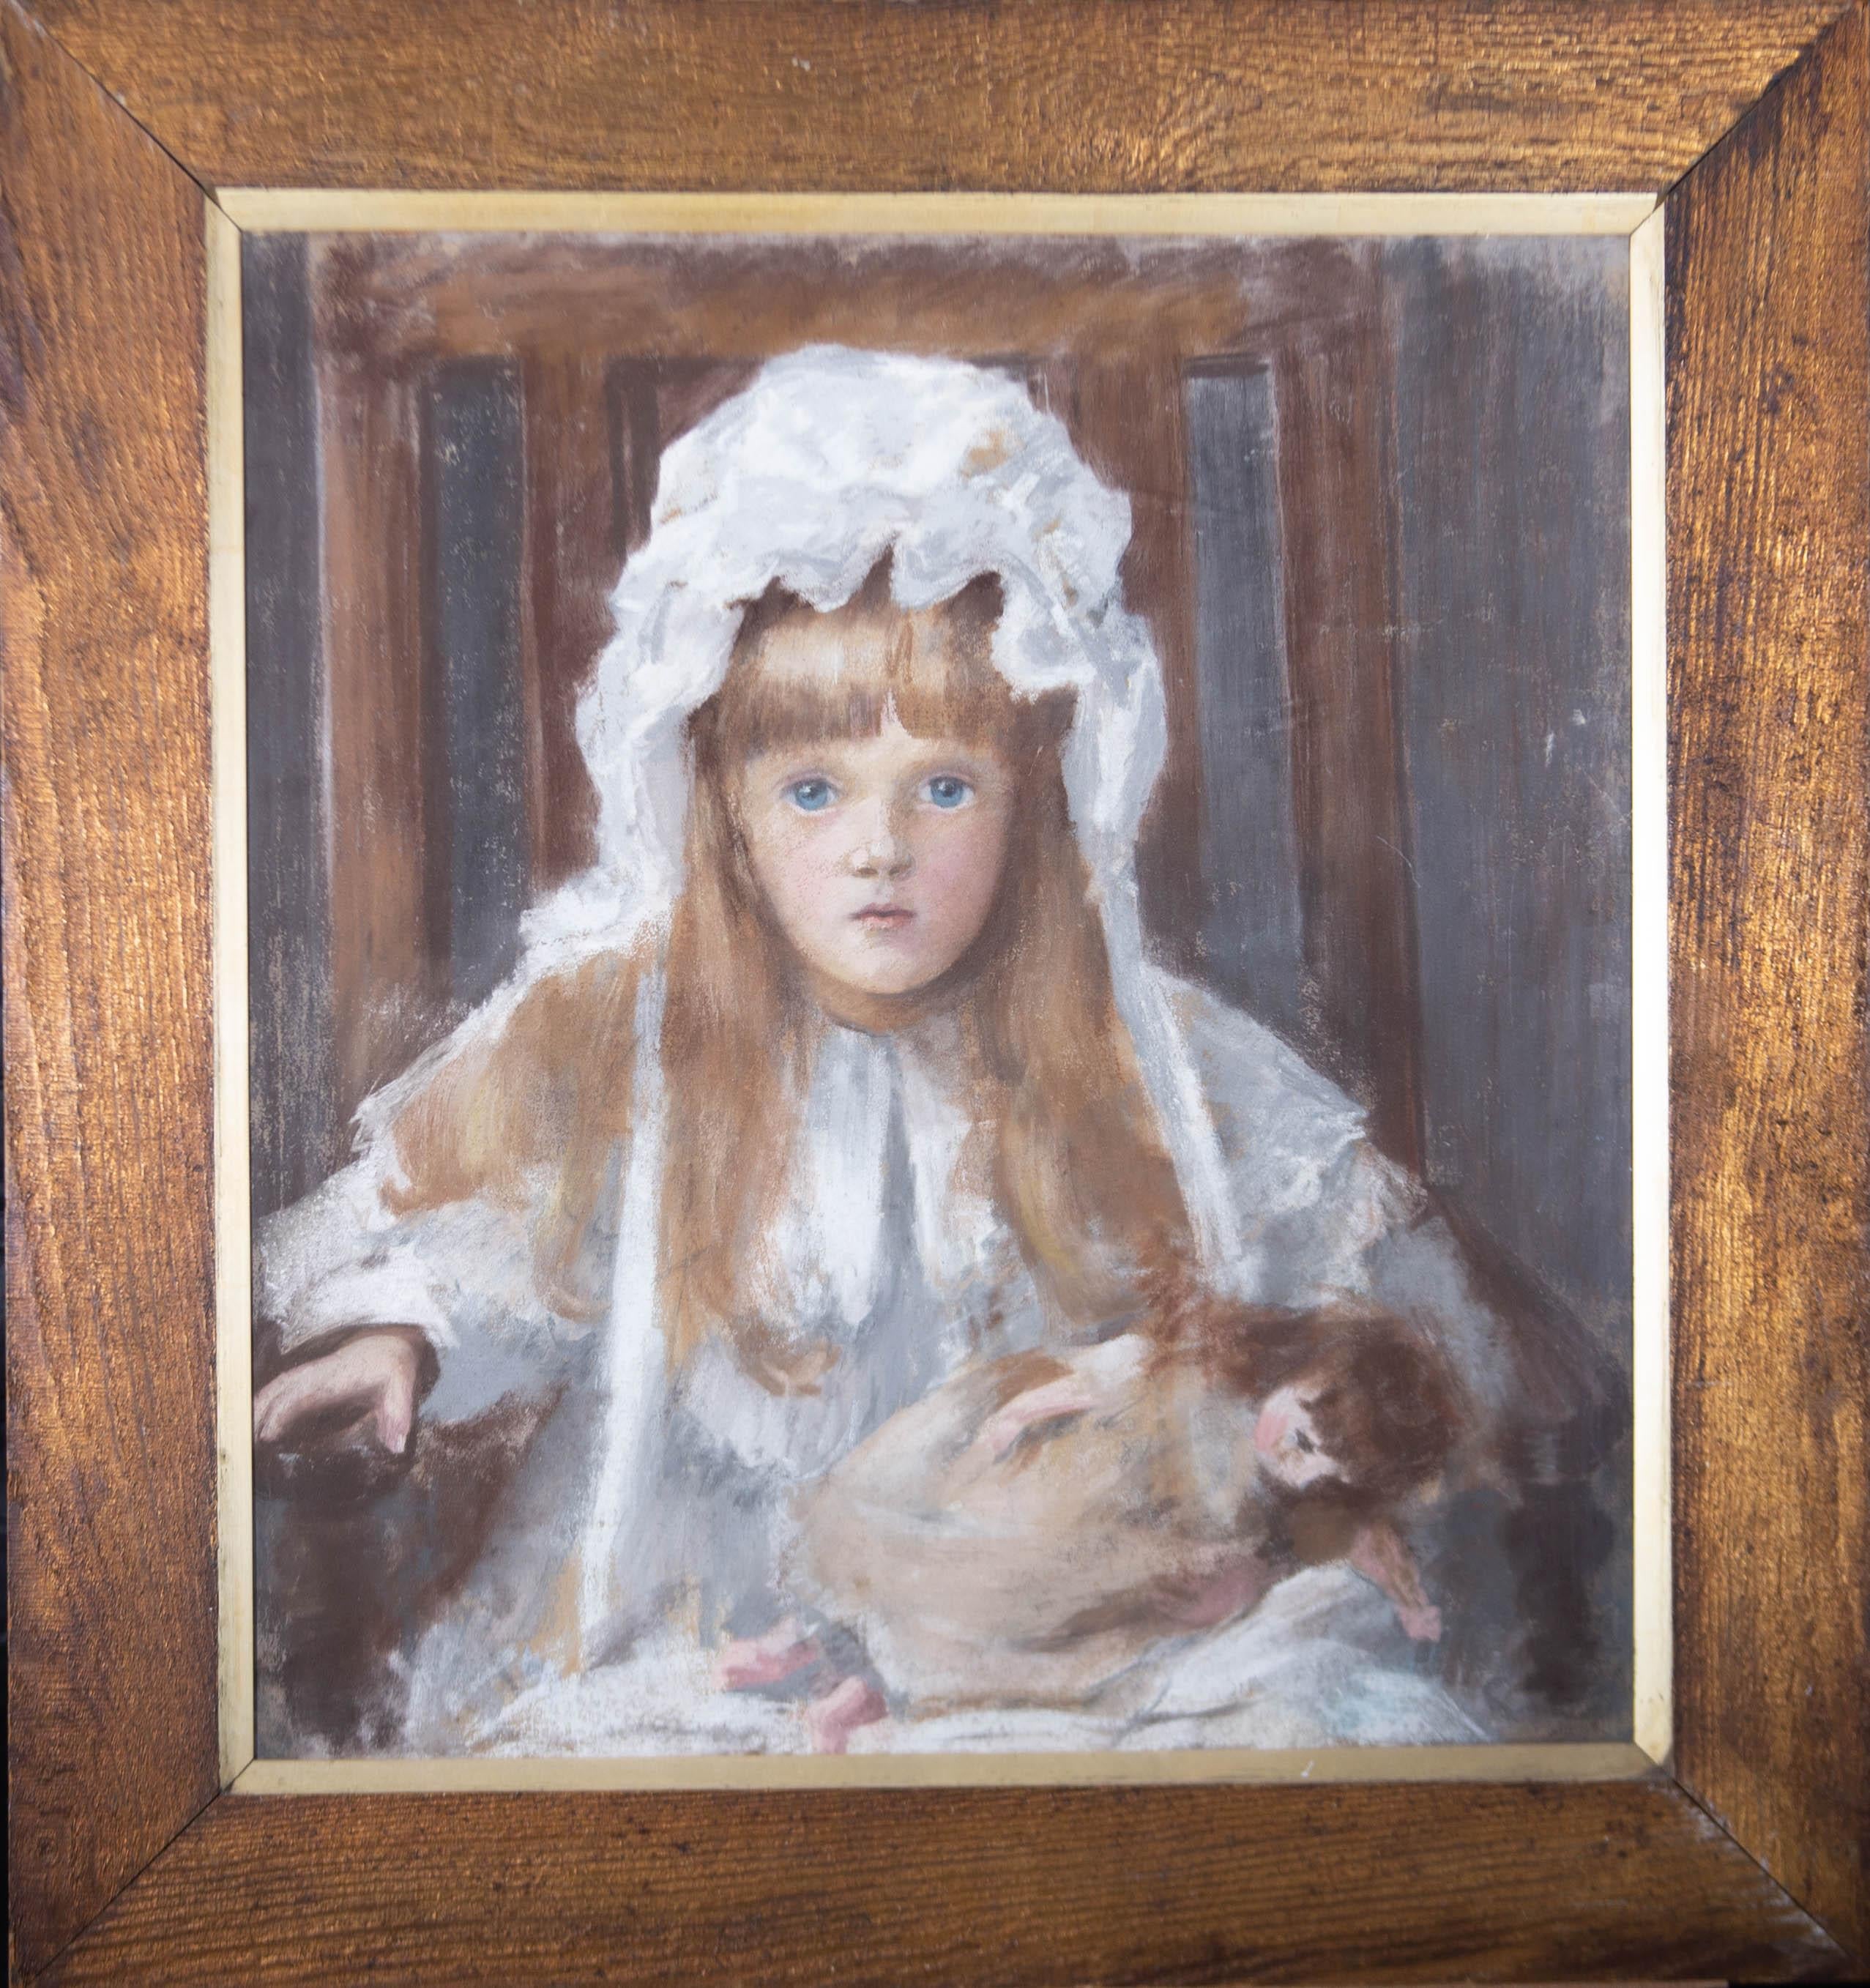 Unknown Portrait - Framed Early 20th Century Pastel - Young Girl with Doll